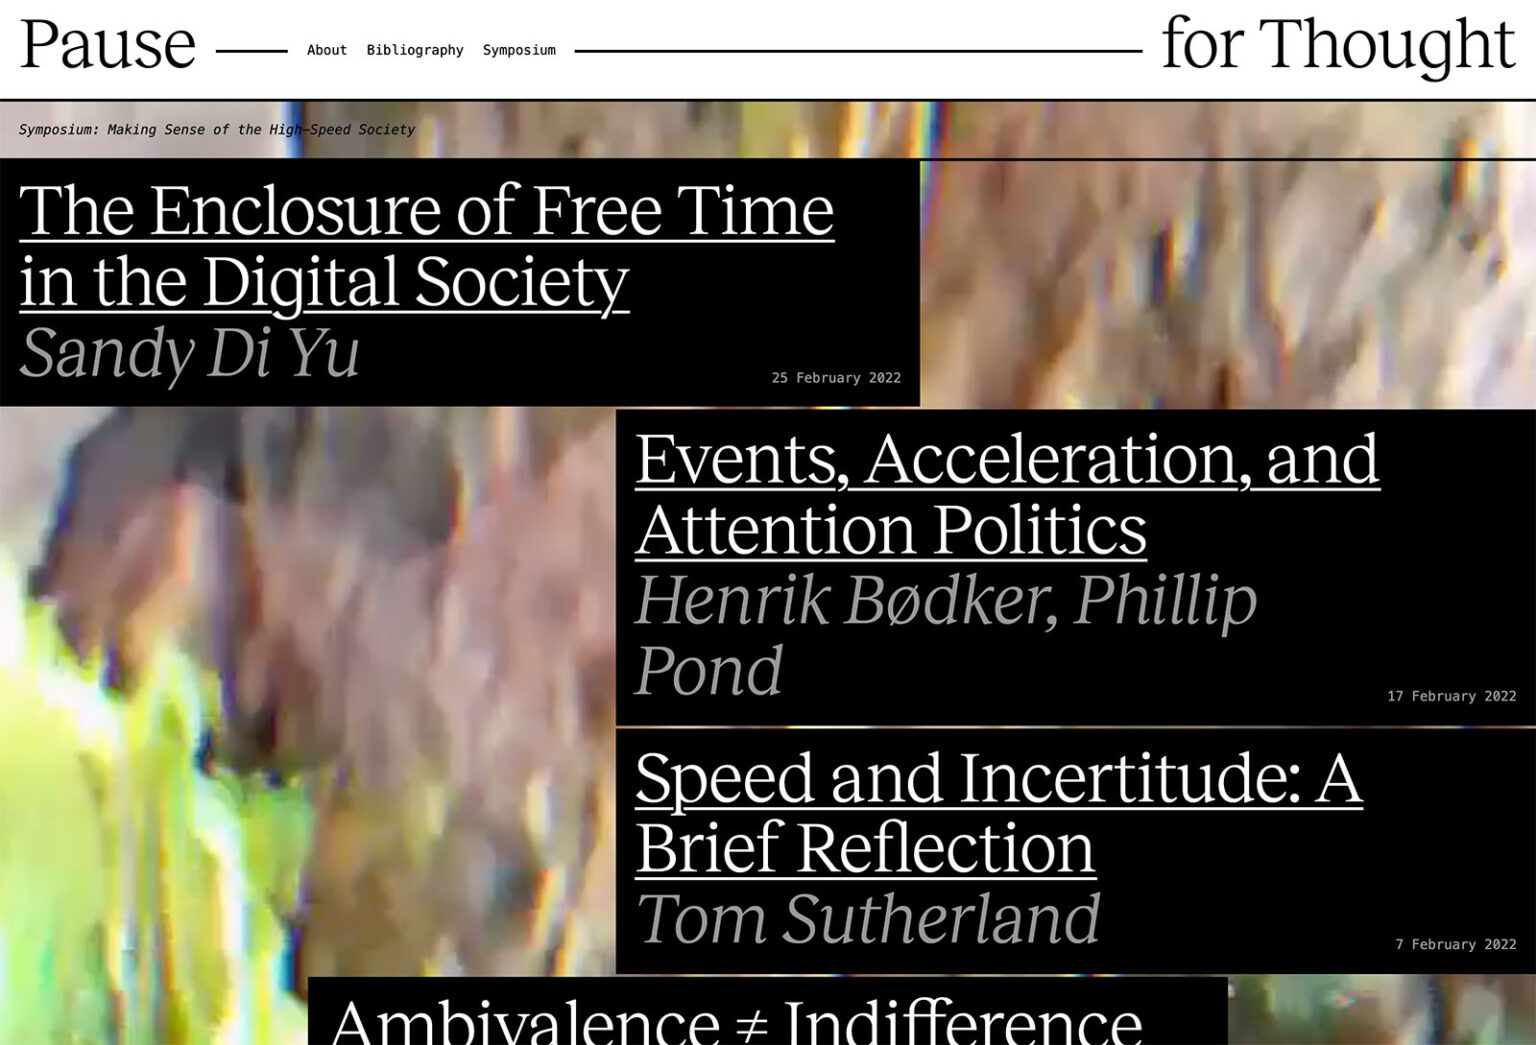 Pause For Thought website homepage